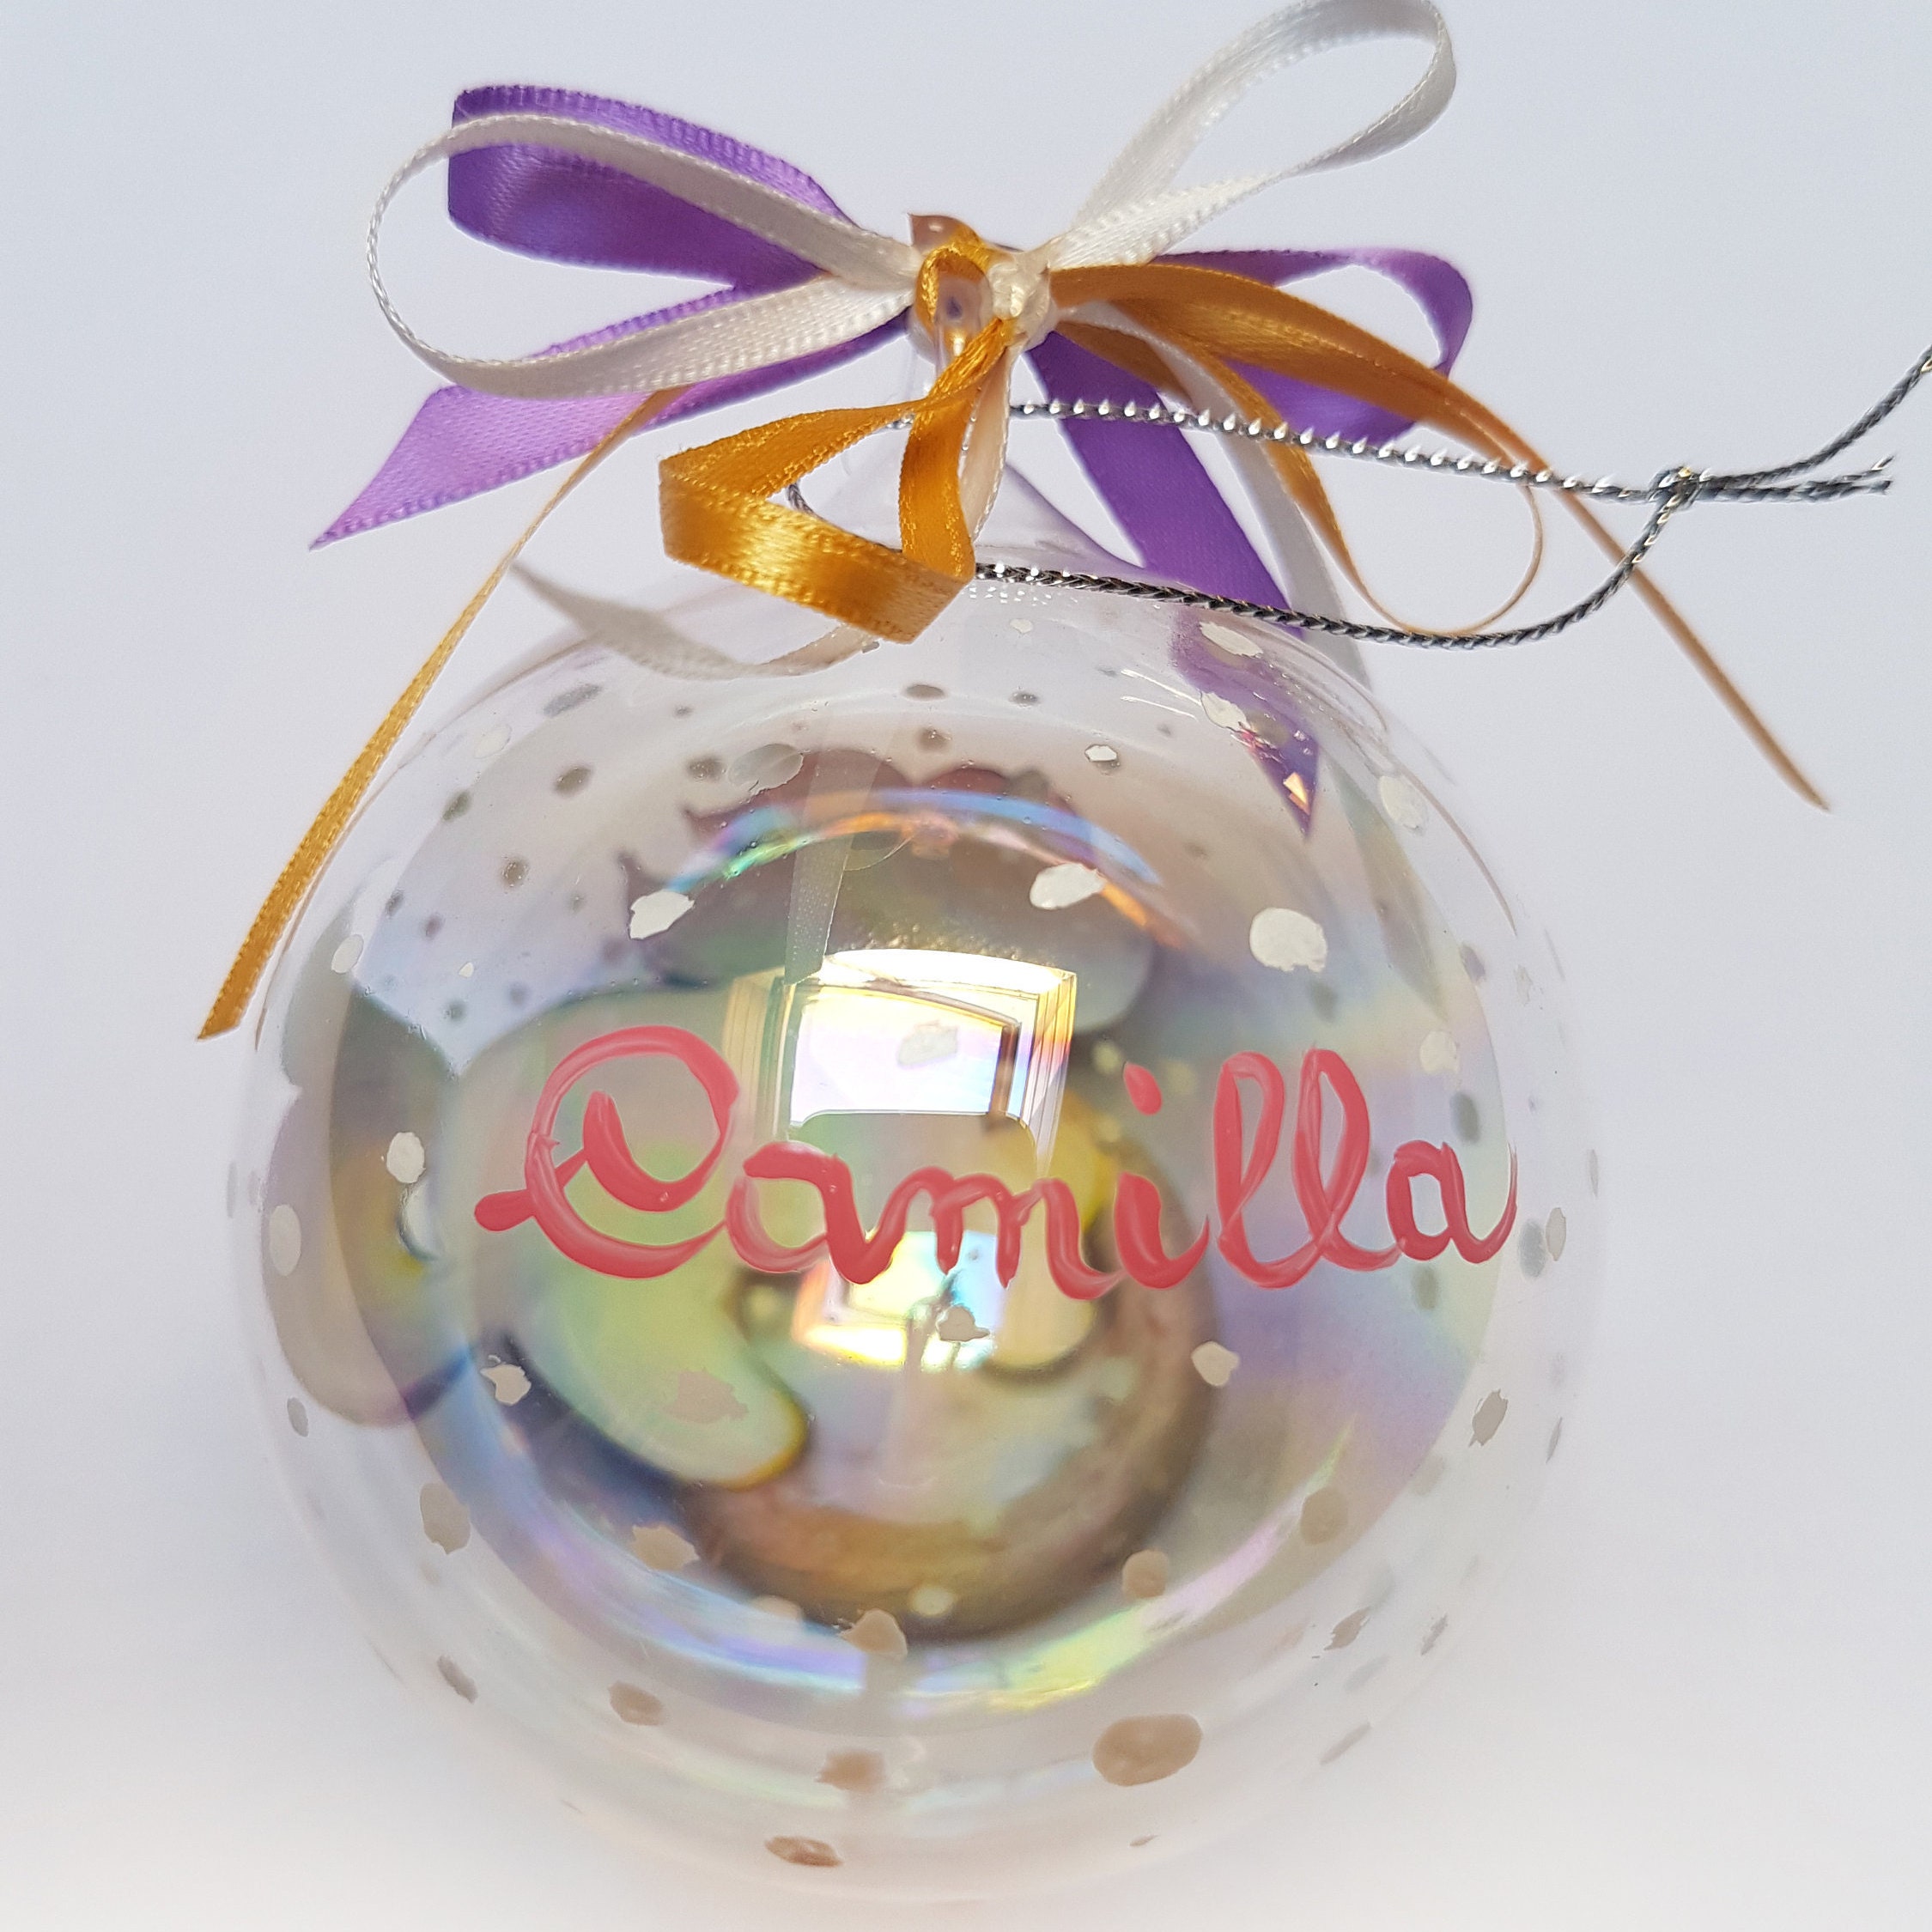 Personalized gift for little girl Unicorn ball personalized with baby boy or girl name to hang on the Christmas tree daughter or child.